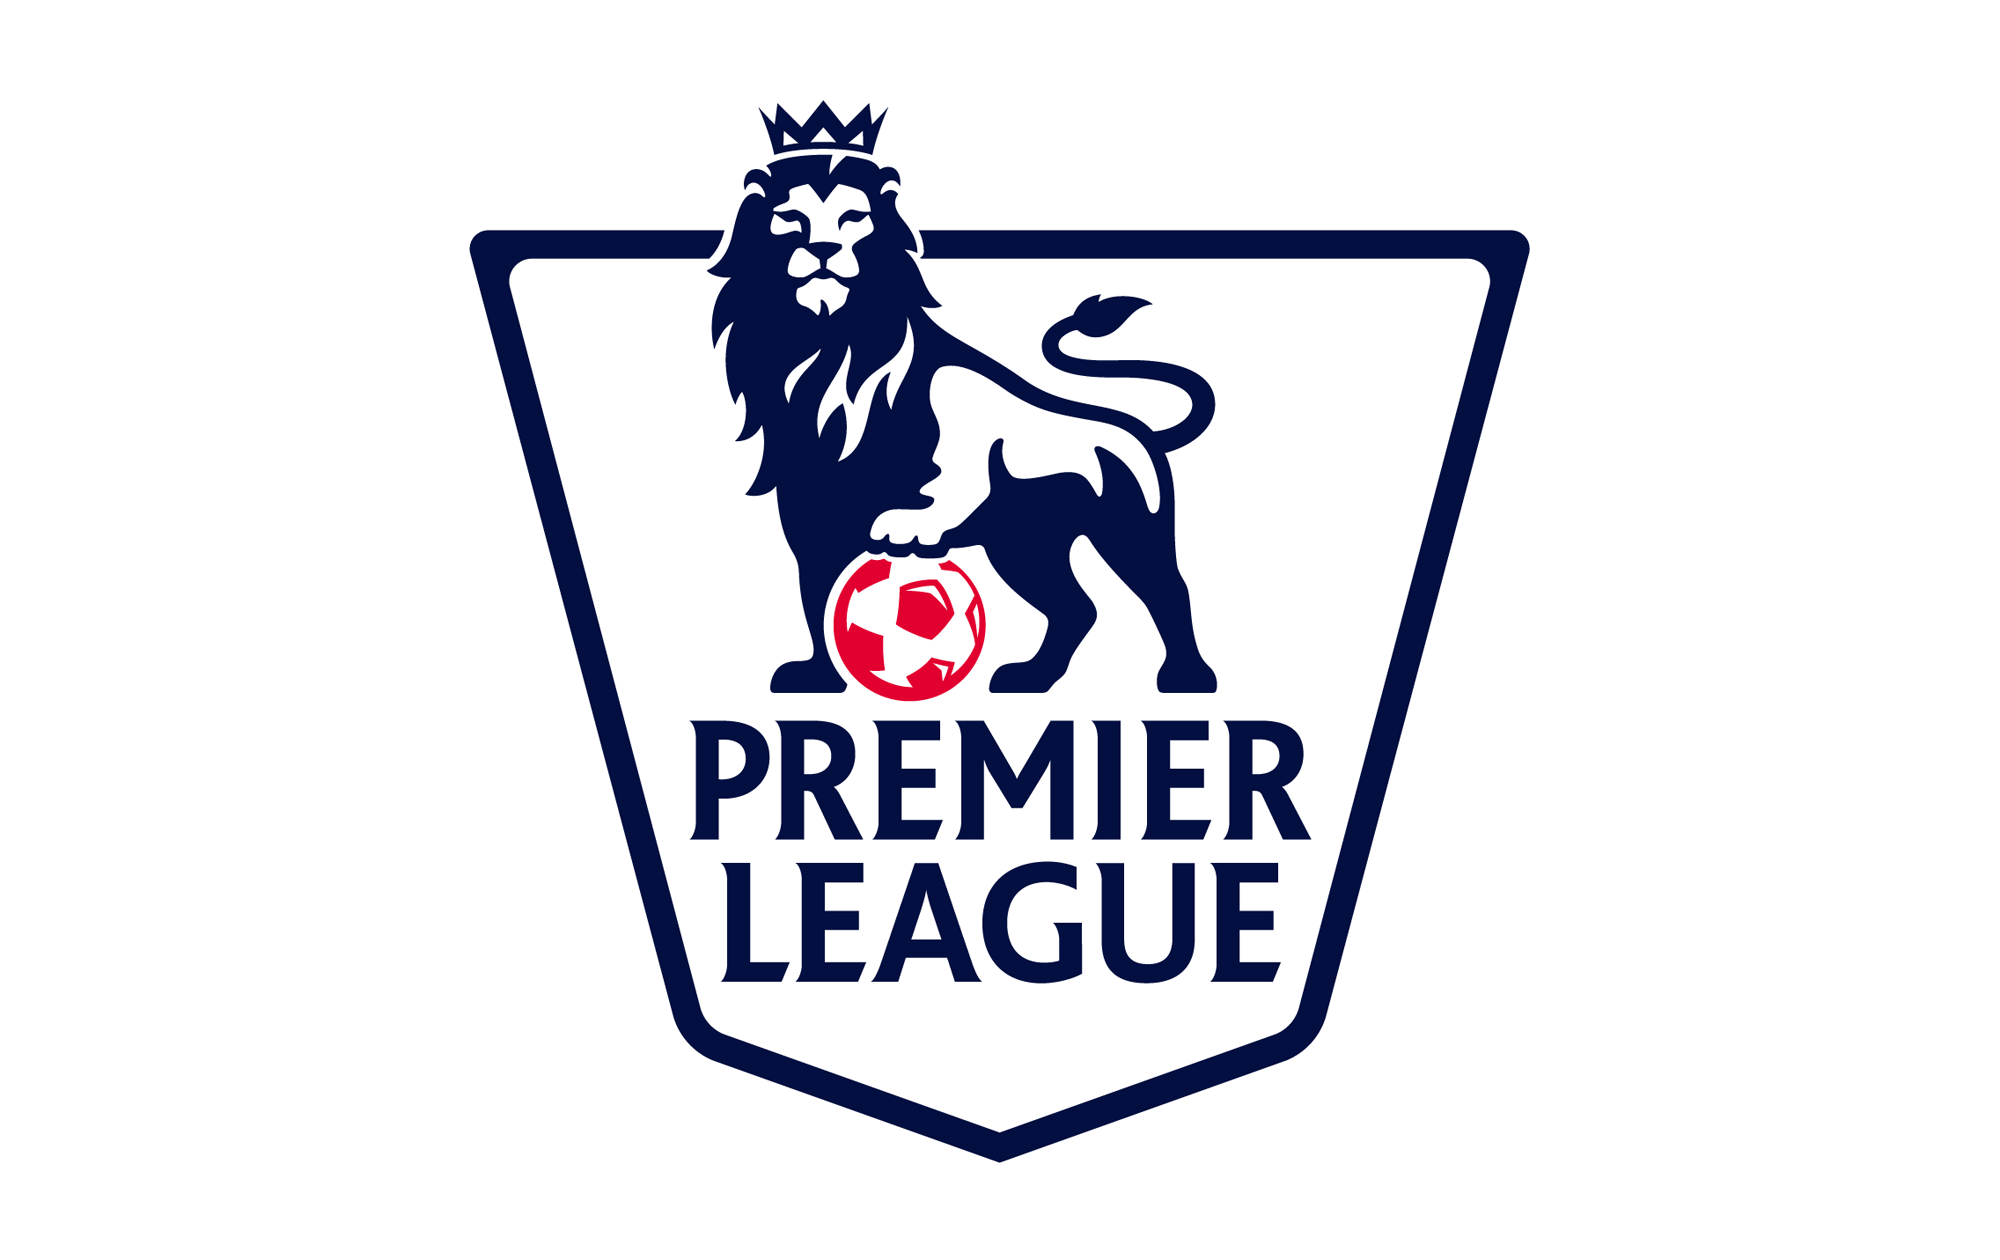 League Logo - Premier League Logo, Premier League Symbol, Meaning, History and ...